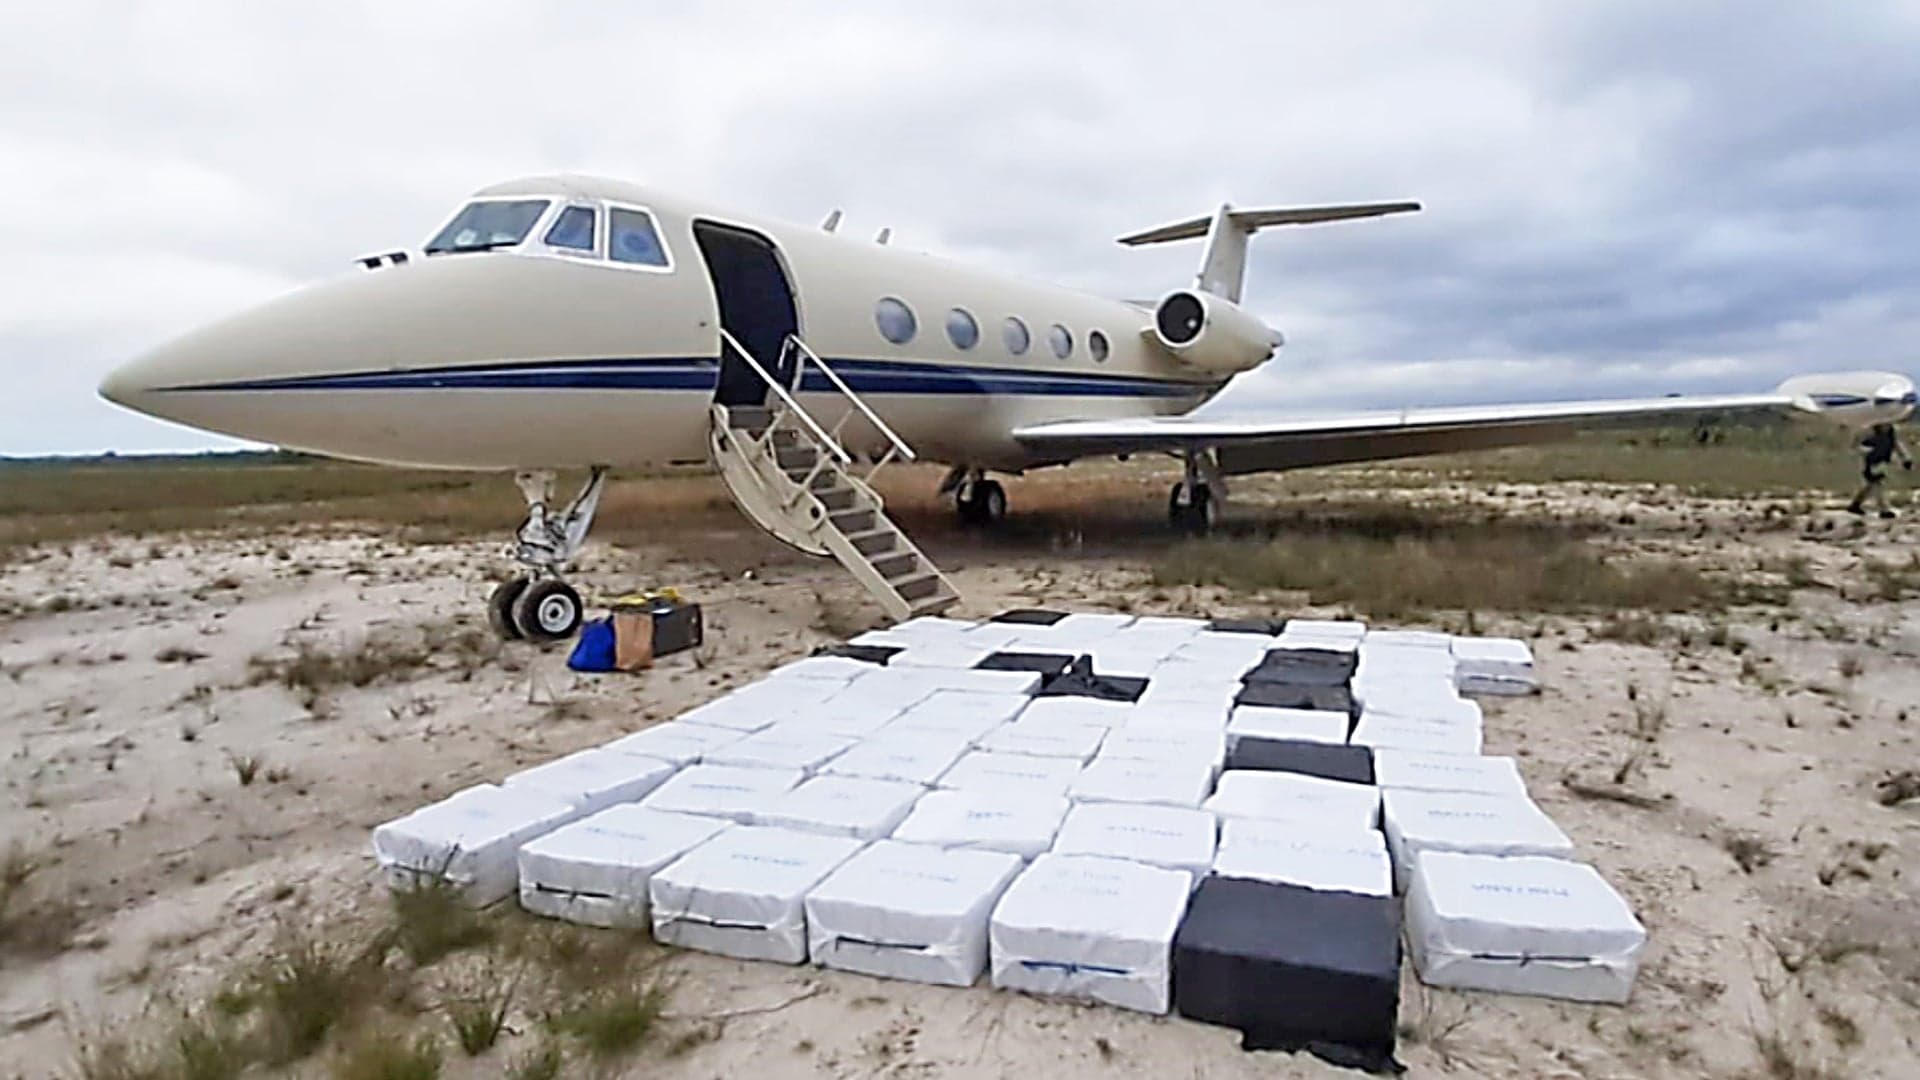 Captured Narco Jet Loaded With 69 Bales Of Cocaine Is Biggest Bust In Belize History